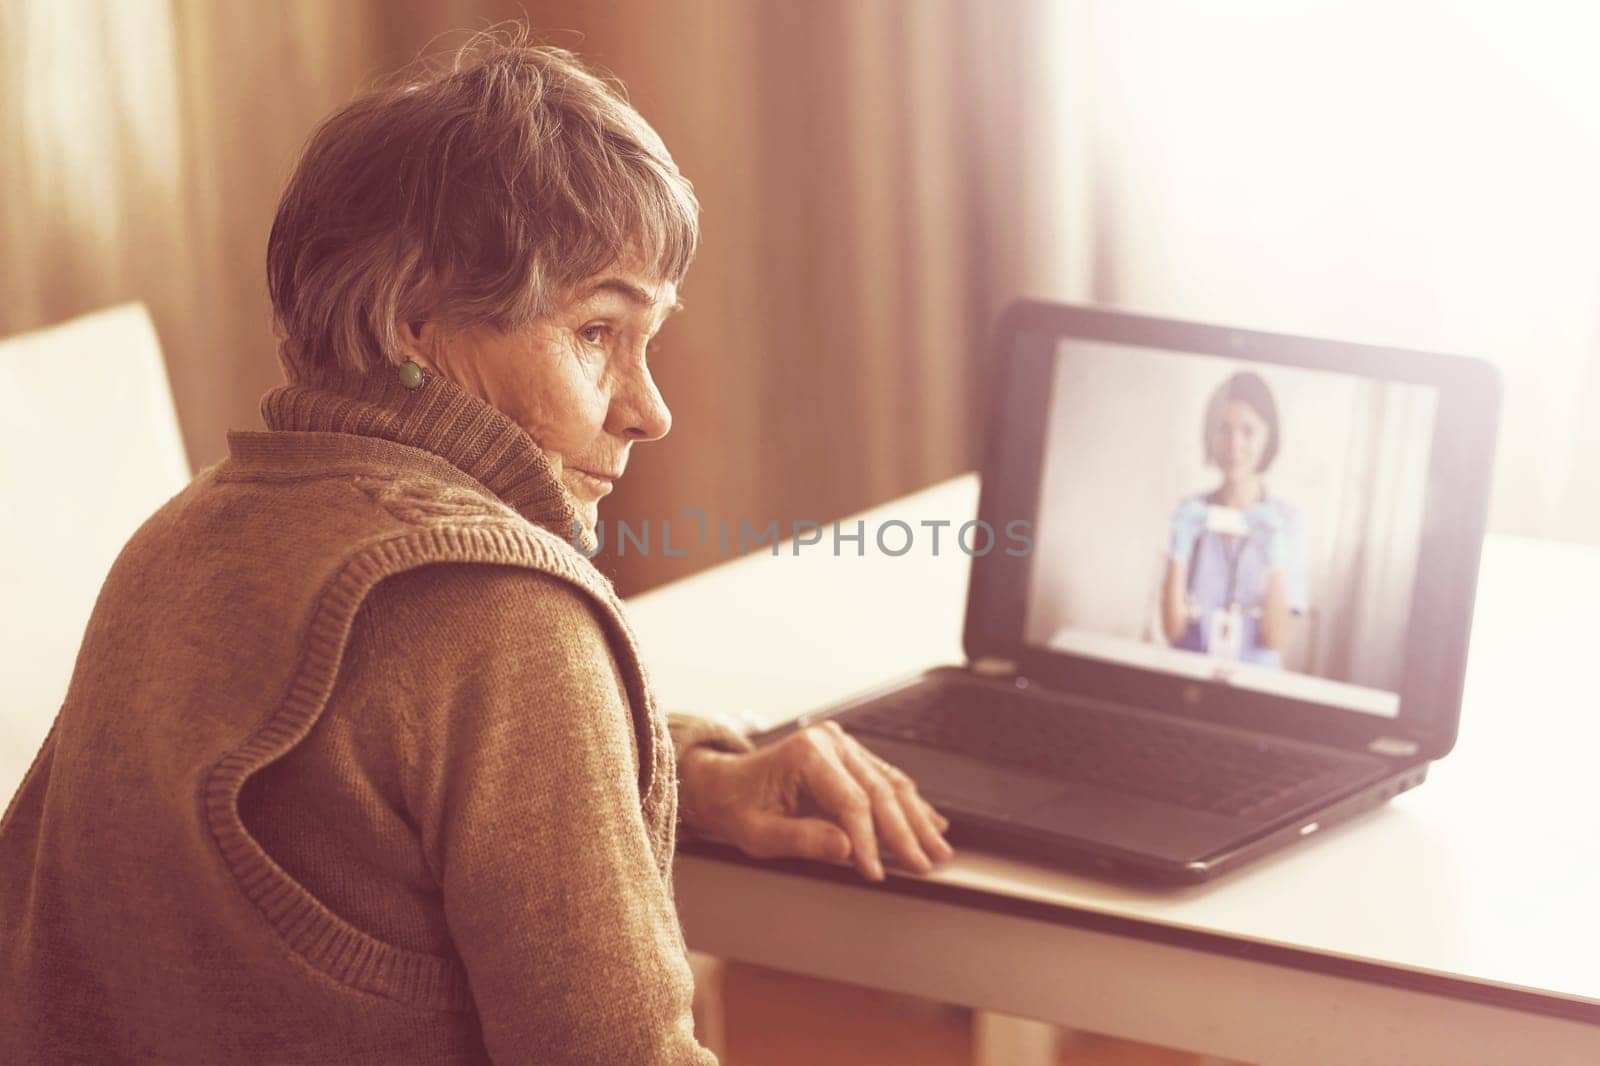 An elderly patient, retired person participates in a digital conversation with a nurse via a webcam. Aged woman talking using a video link with a female doctor, has an online consultation at home.